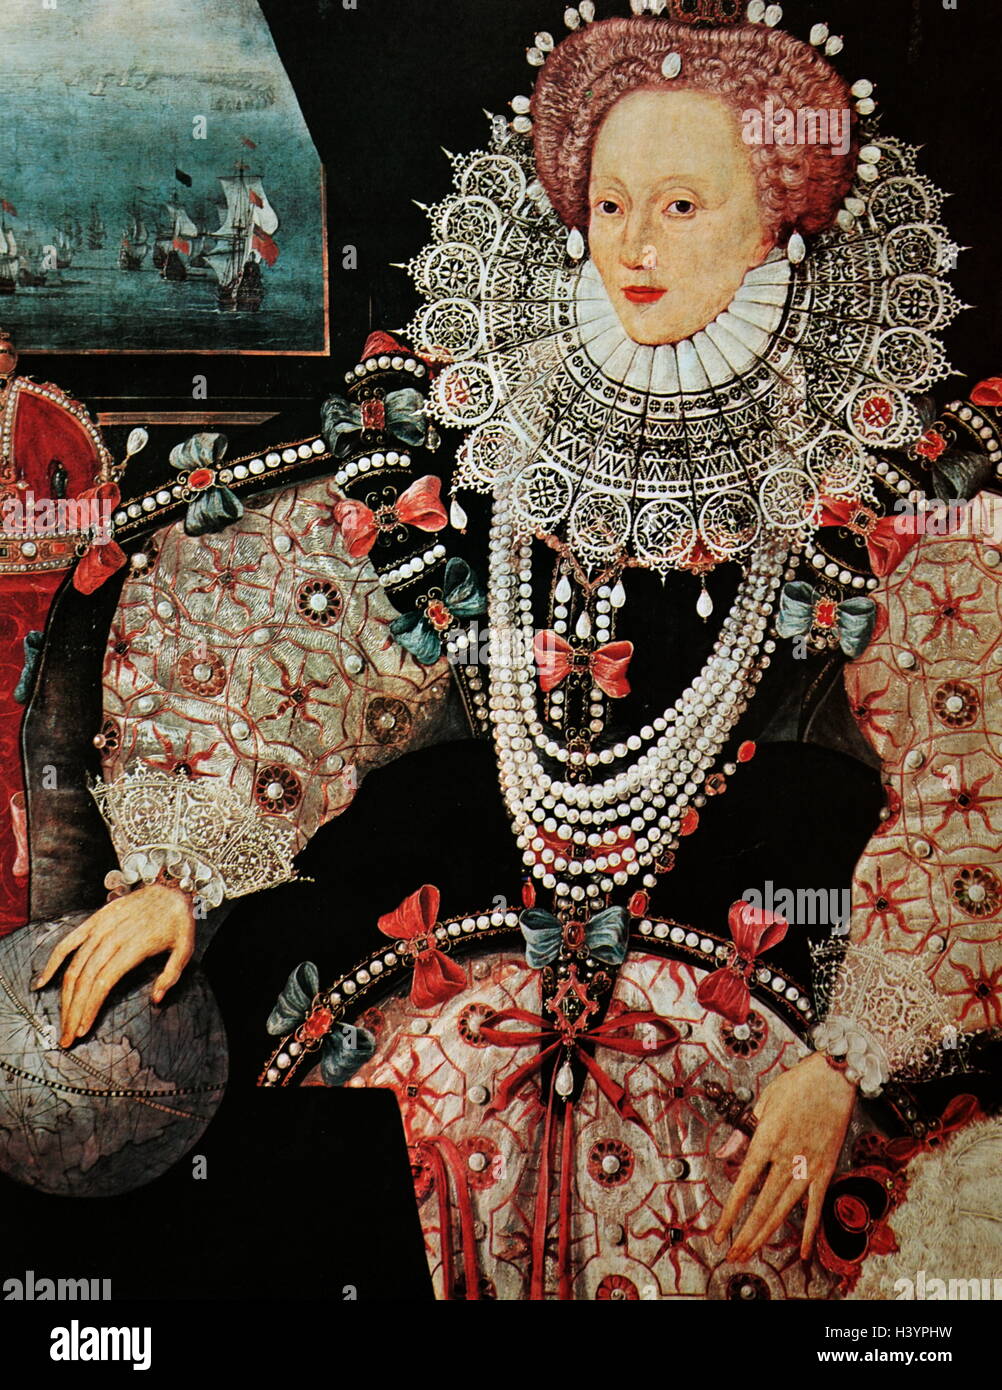 The Armada Portrait of Elizabeth I of England (1533-1603) was Queen of England and Ireland. The Armada Portrait is one of three surviving versions of an allegorical panel painting depicting the Tudor queen surrounded by symbols of imperial majesty against a backdrop representing the defeat of the Spanish Armada. Dated 16th Century Stock Photo